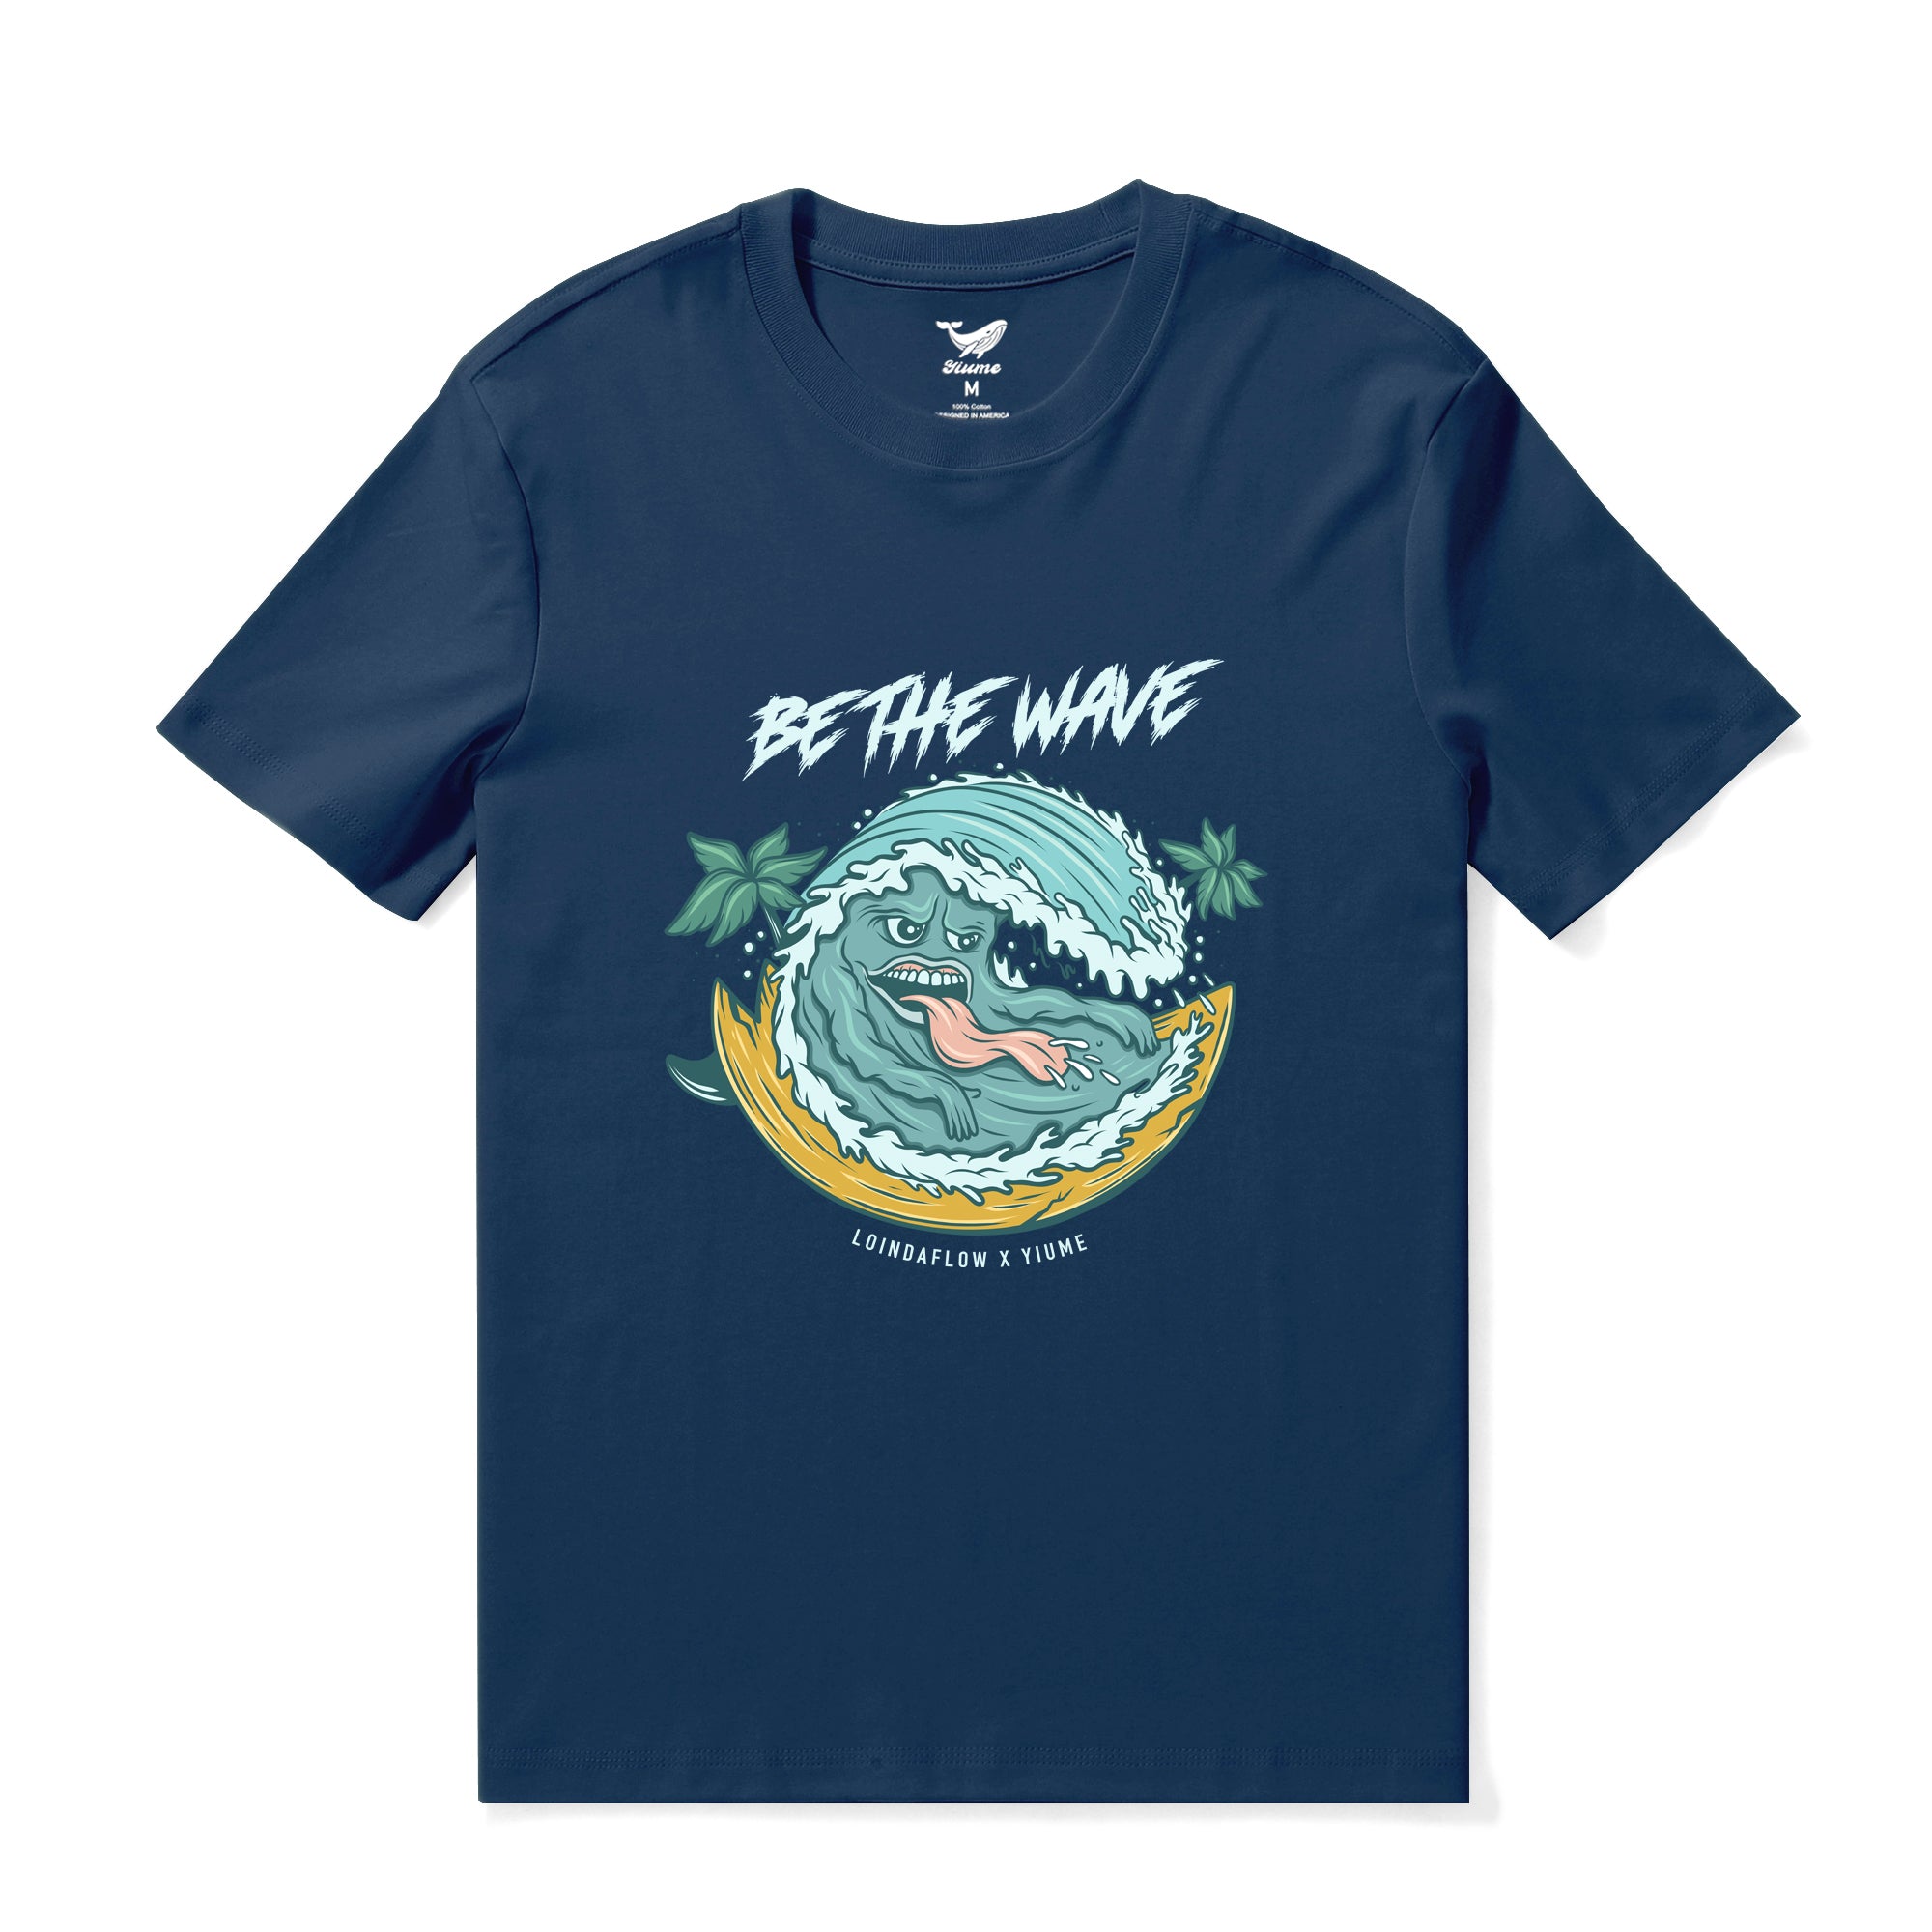 Hawaiian Tee For Men Be the Wave By Loindaflow Tee Crew Neck 100% Cotton - NAVY BLUE